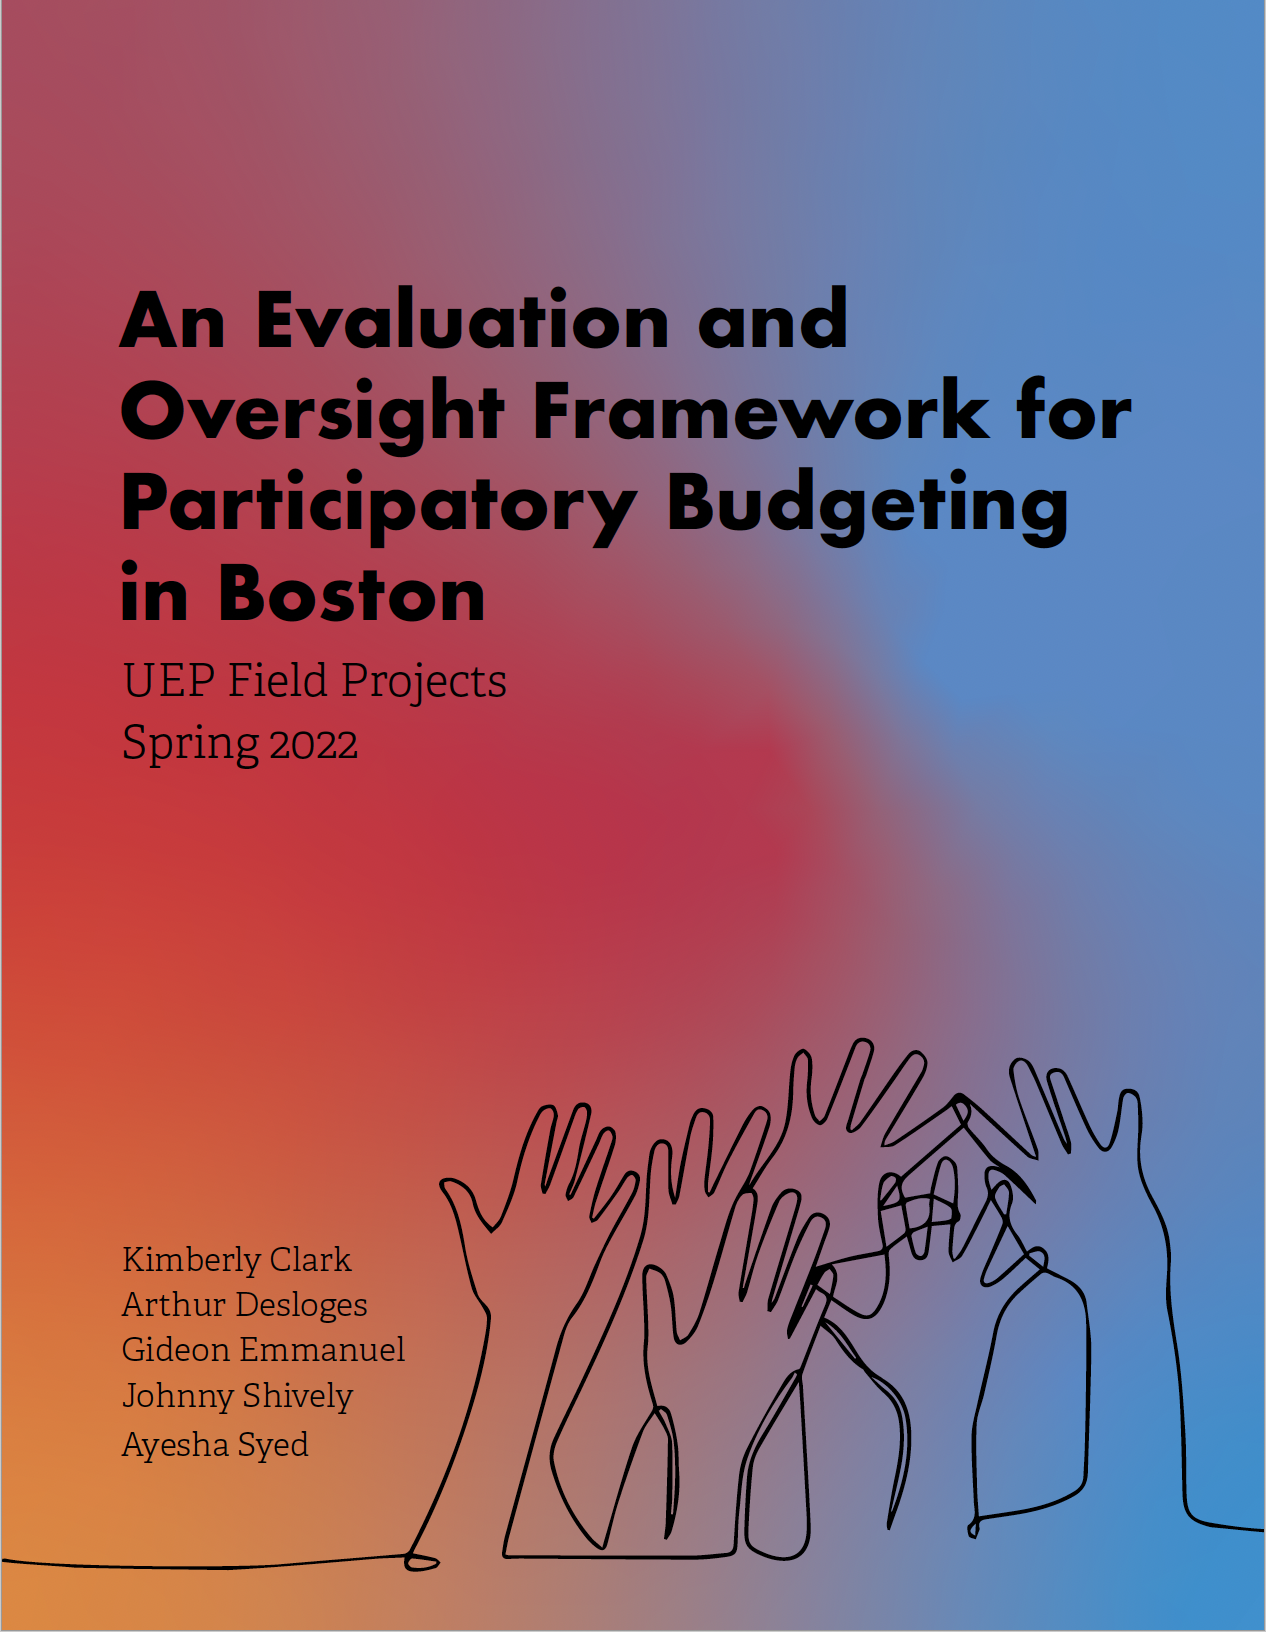 cover for PB Oversight and Evaluation report - bottom right corner: silhouette hands reaching up, orange to pink to blue gradient background